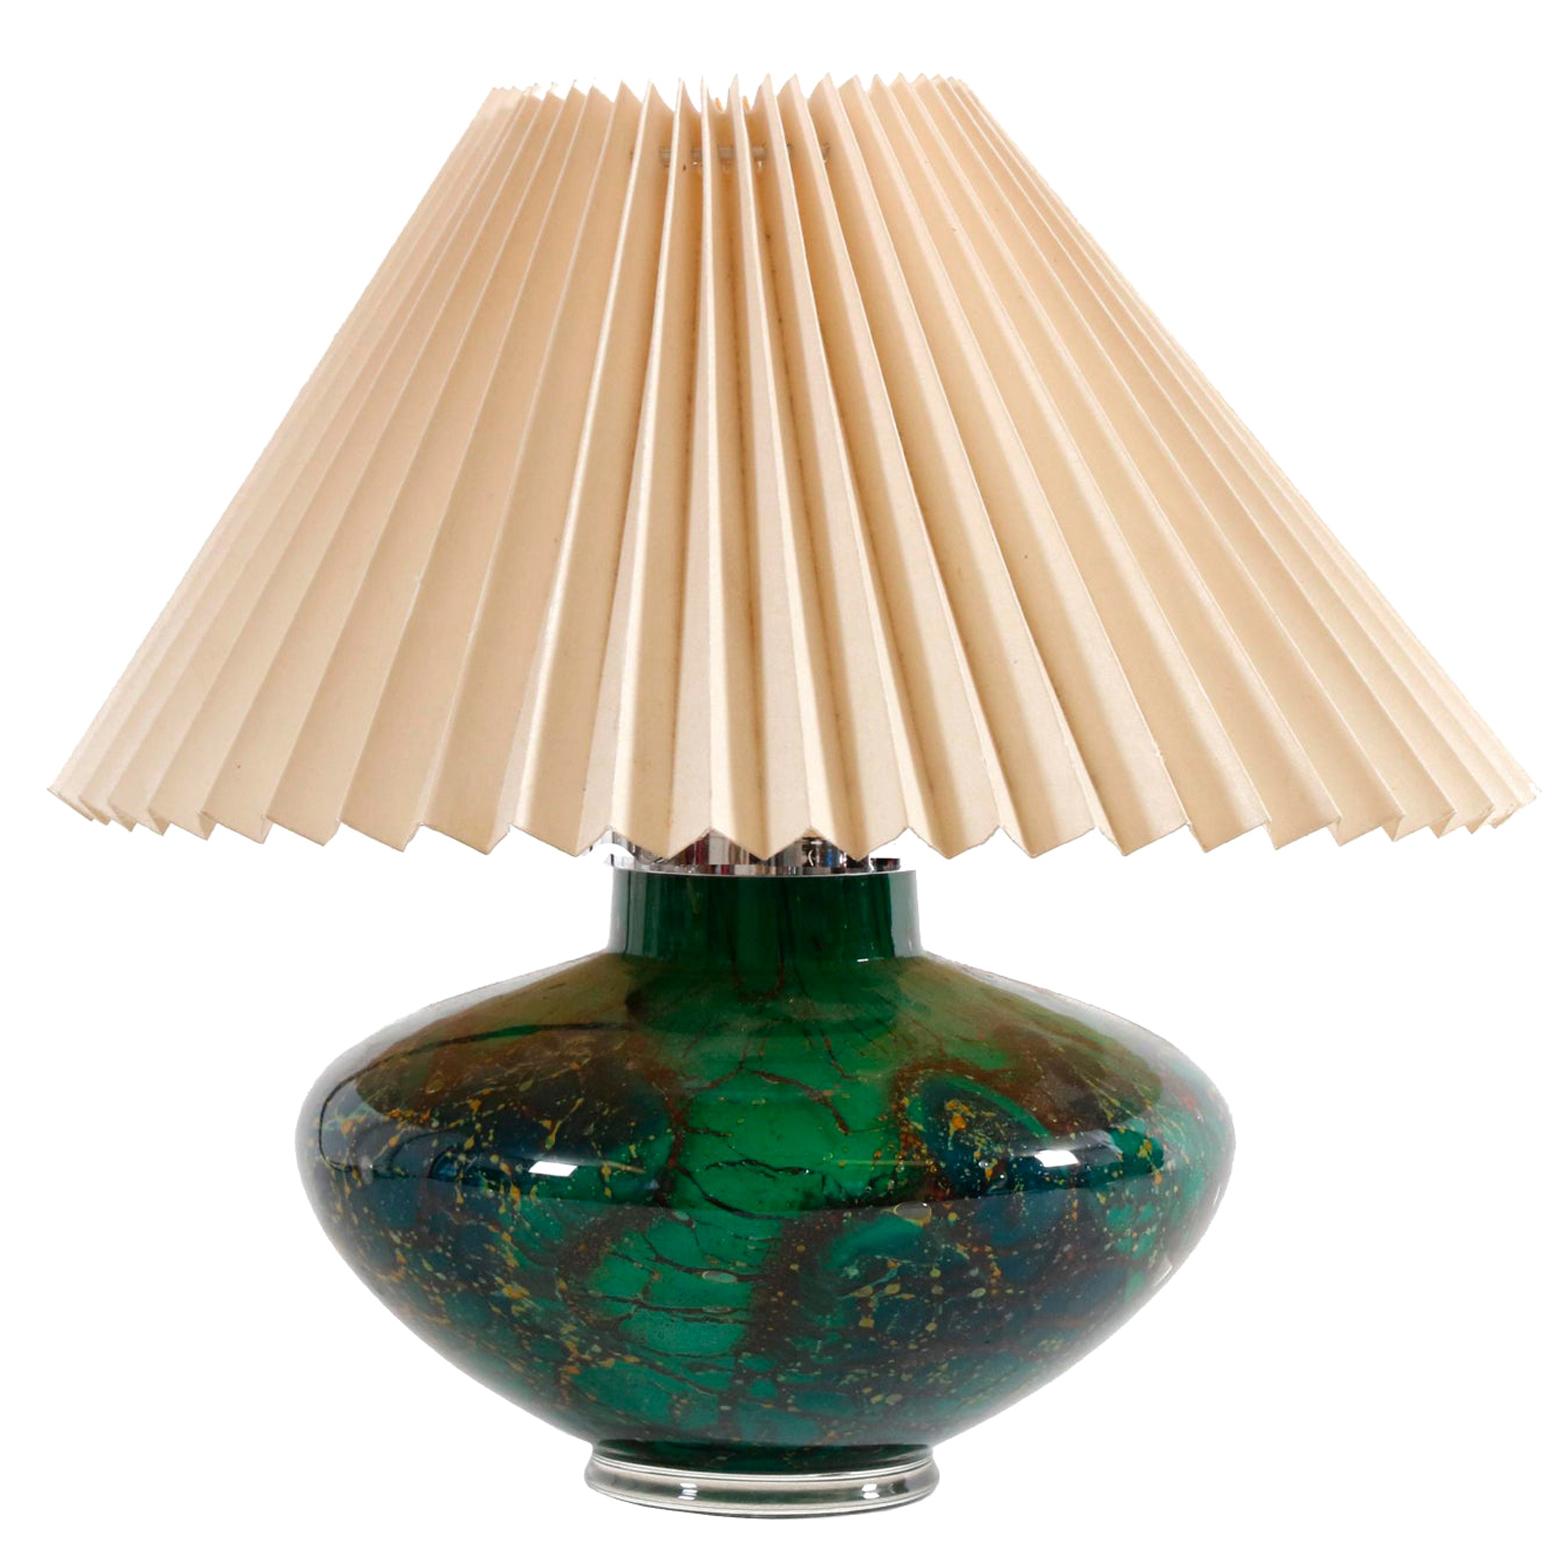 Art Deco WMF Ikora Art Glass in Green, Black and Gold, Table Lamp